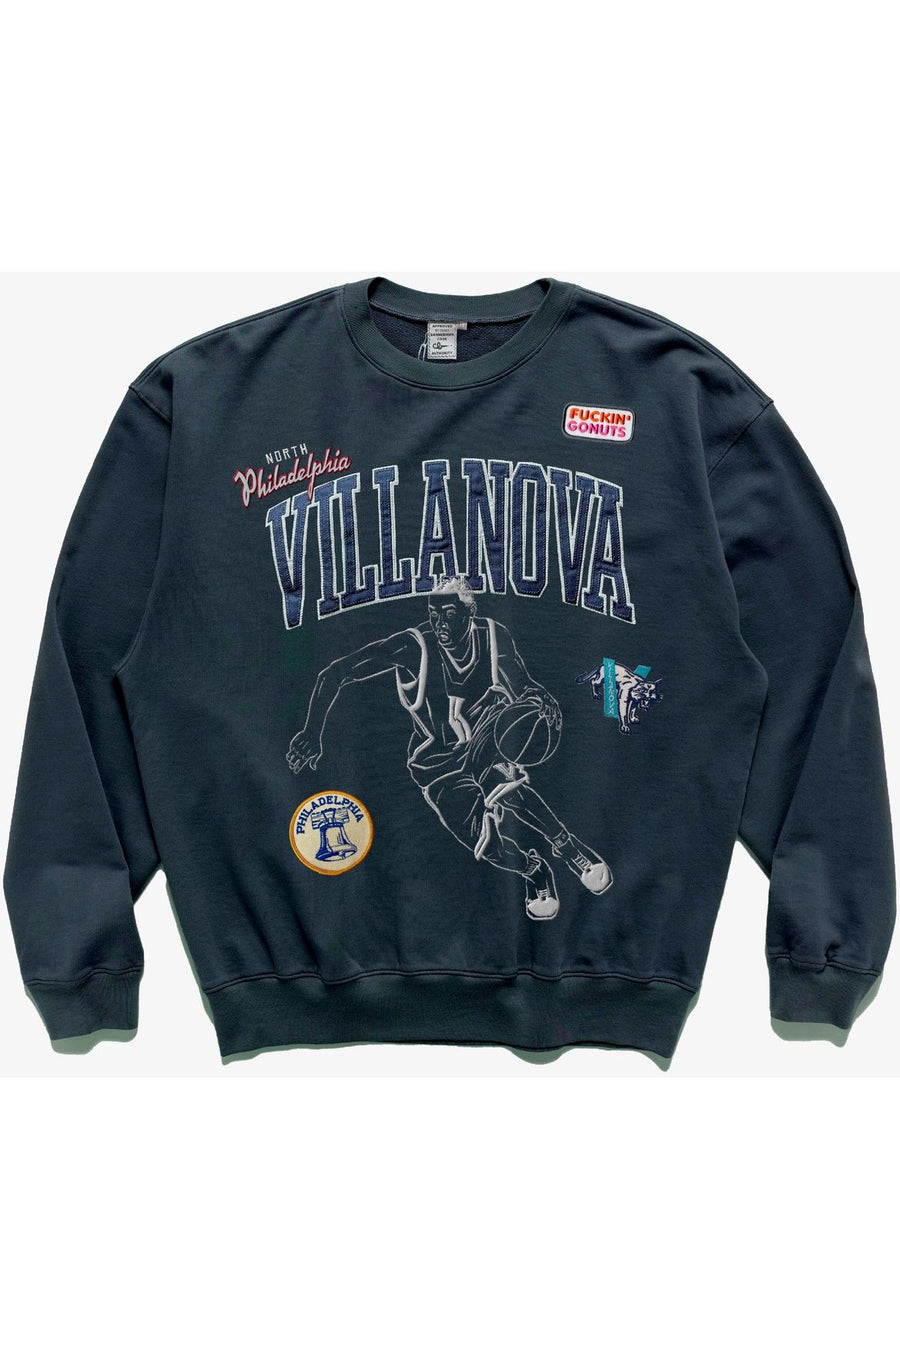 March Madness Heritage Series Crewneck - Kyle Lowry